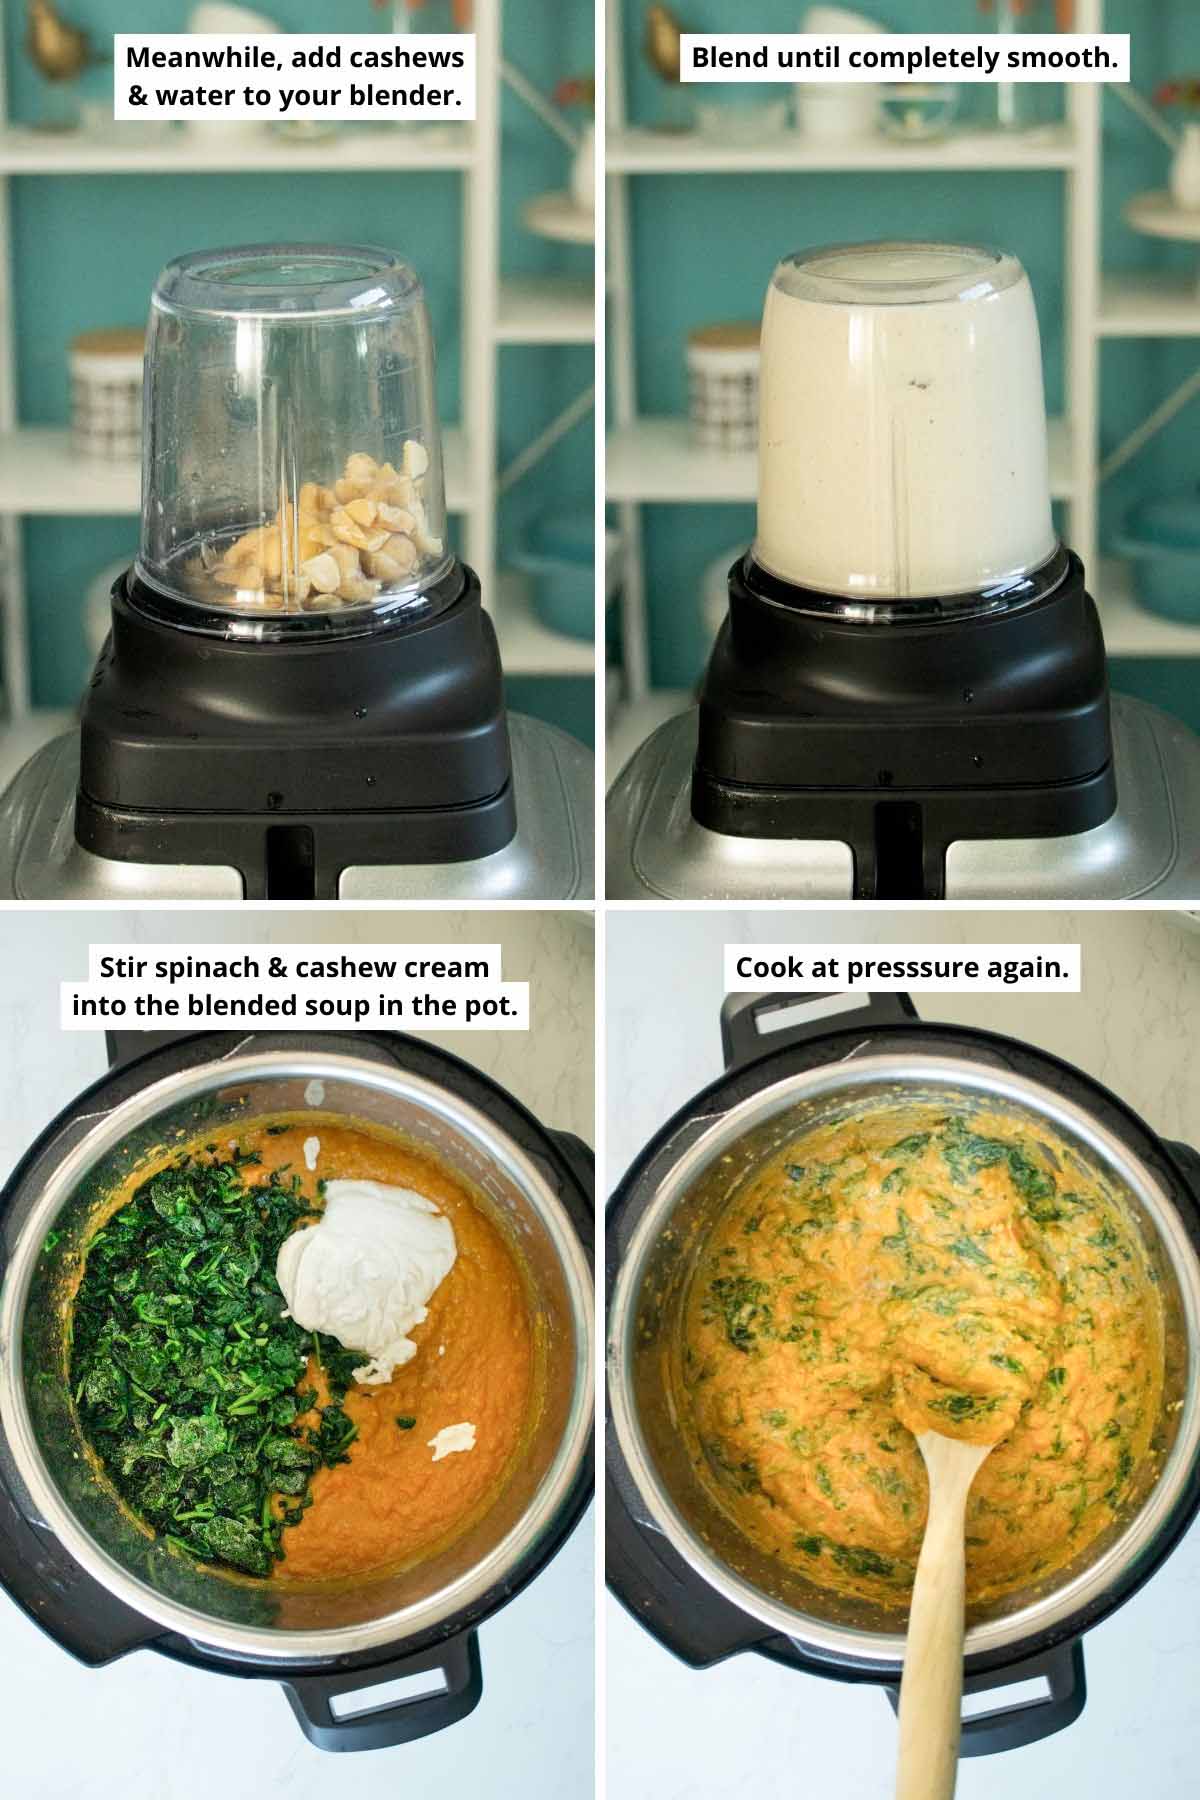 image collage showing the cashews and water in the blender before and after blending and adding the spinach and cashew cream to the soup before and after cooking it